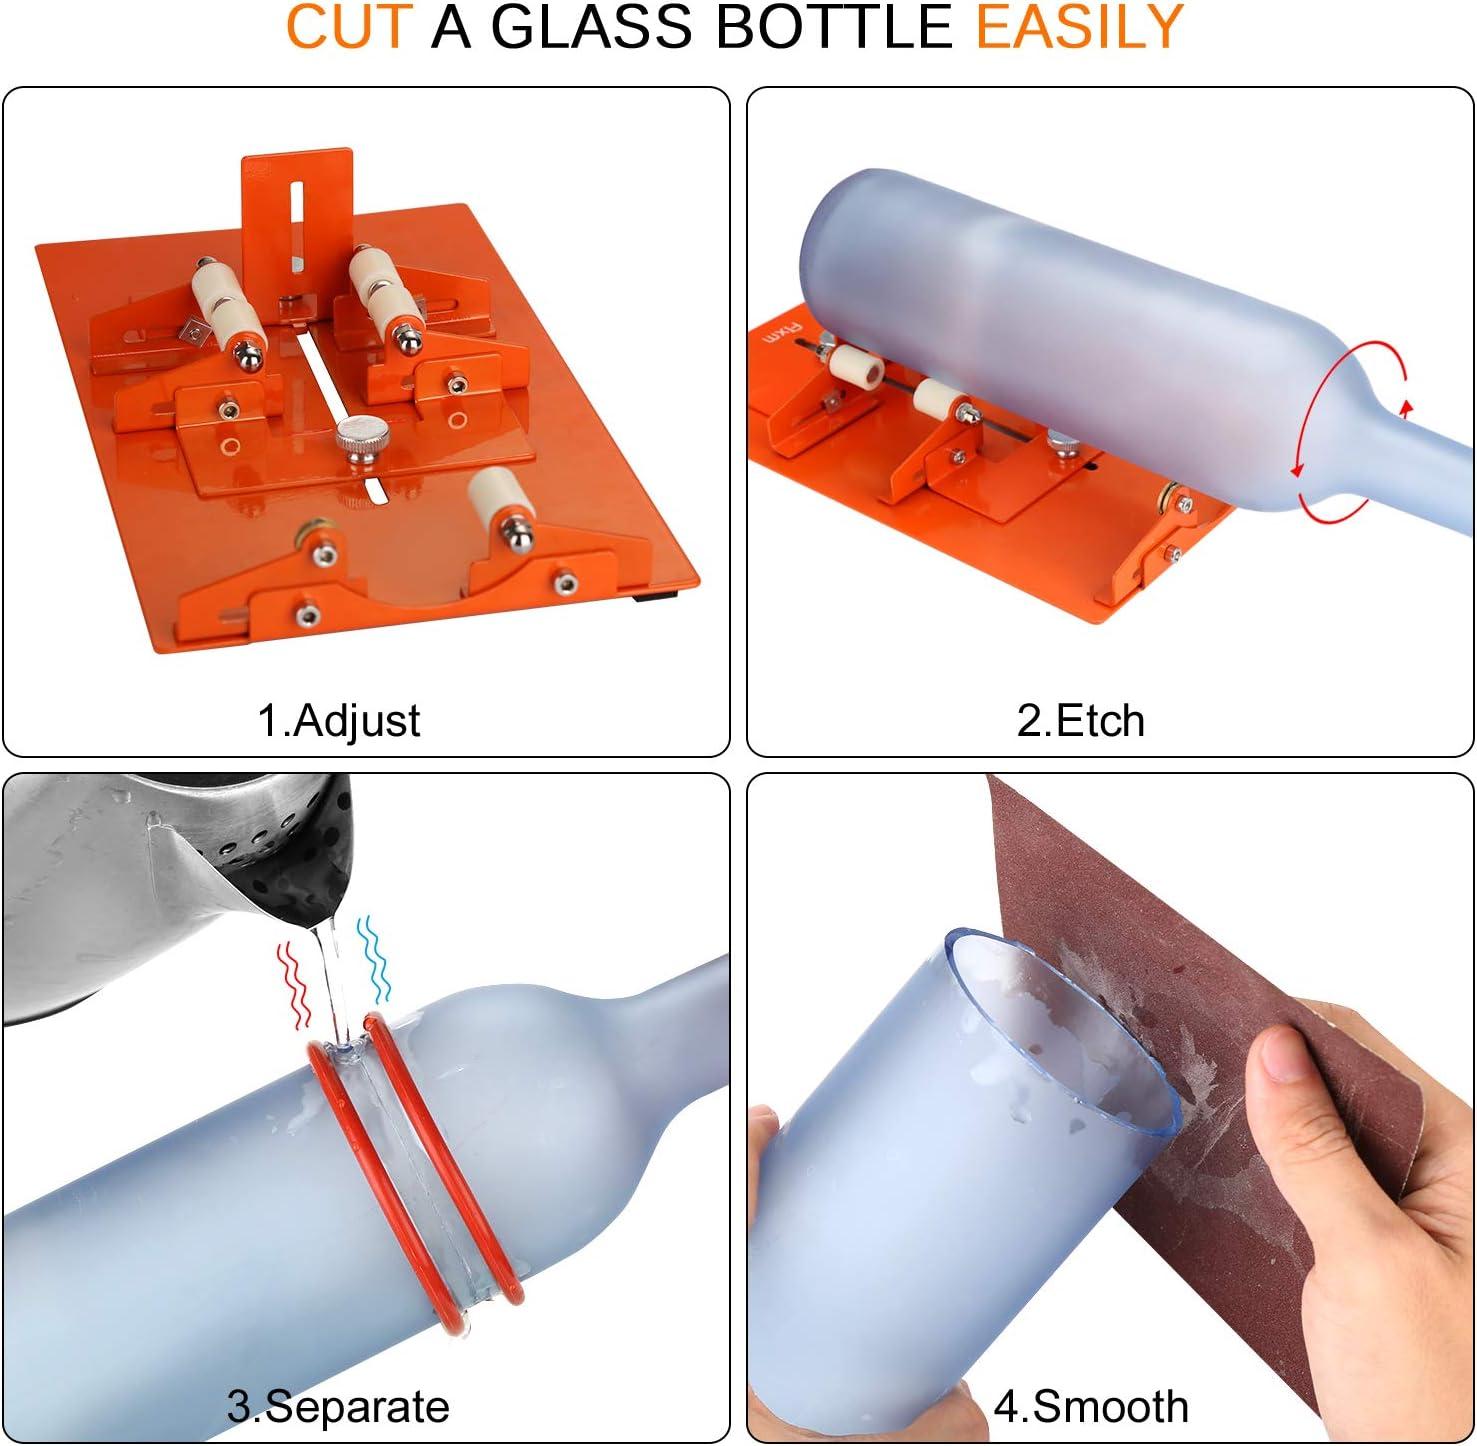 FIXM Glass Bottle Cutter Updated Version Bottle Cutting Machine for Various  Sizes Shapes of Bottle: Round Square Oval Bottle and Bottle Neck Glass  Bottle Cutting Tool for DIY Creation